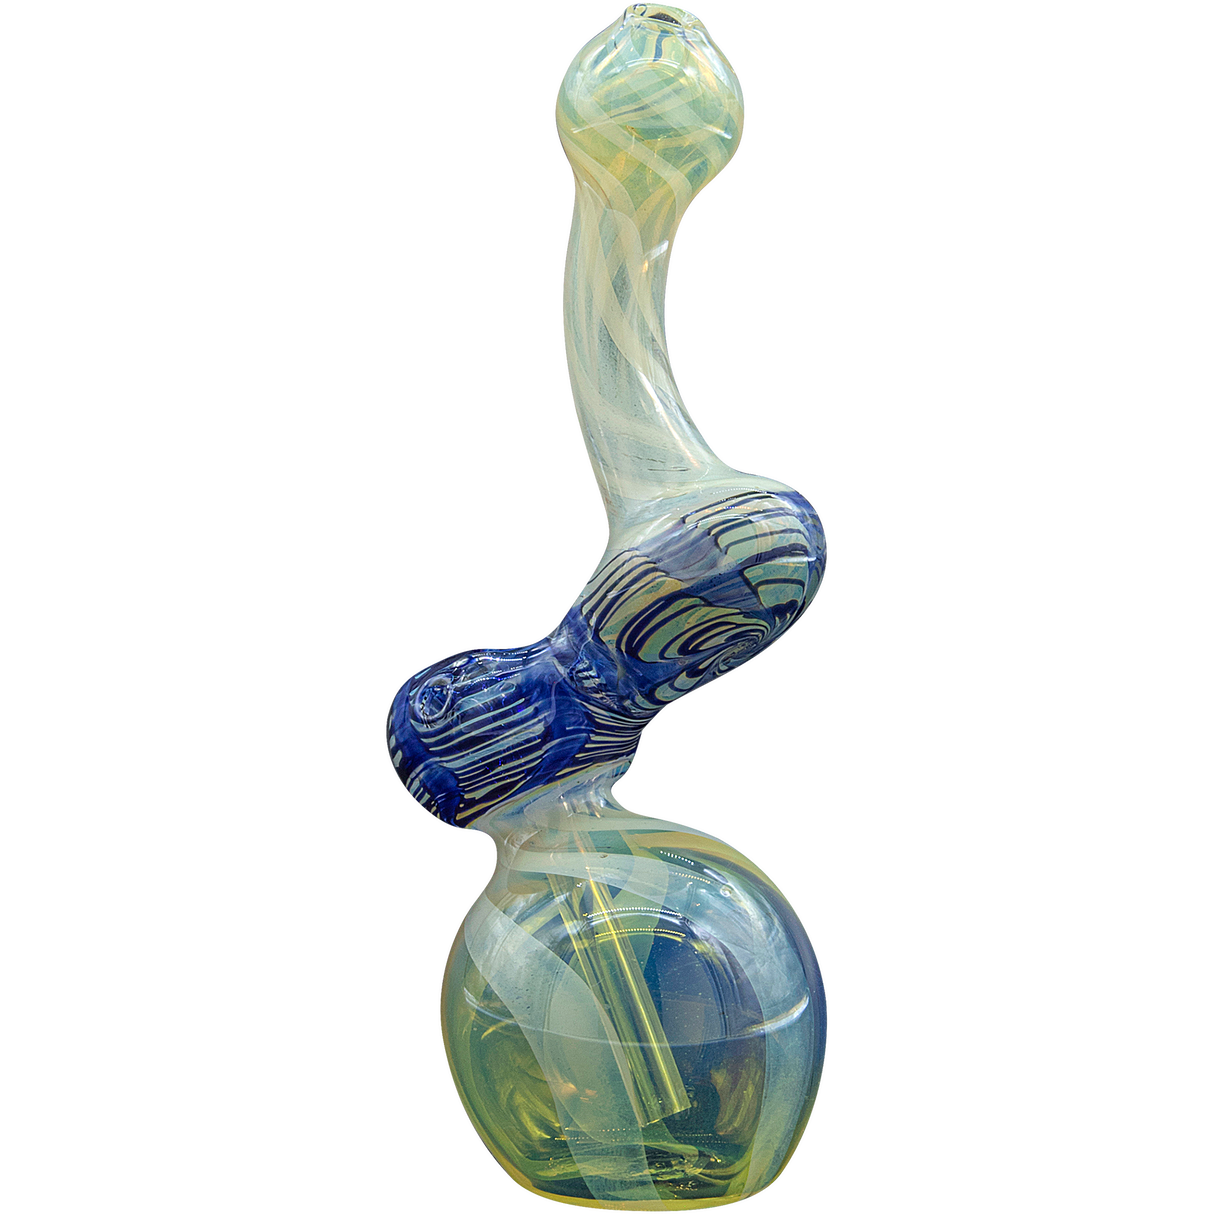 LA Pipes "Rake Bubb" Fumed Sherlock Bubbler Pipe in Blue Variant, 6" Height, Front View